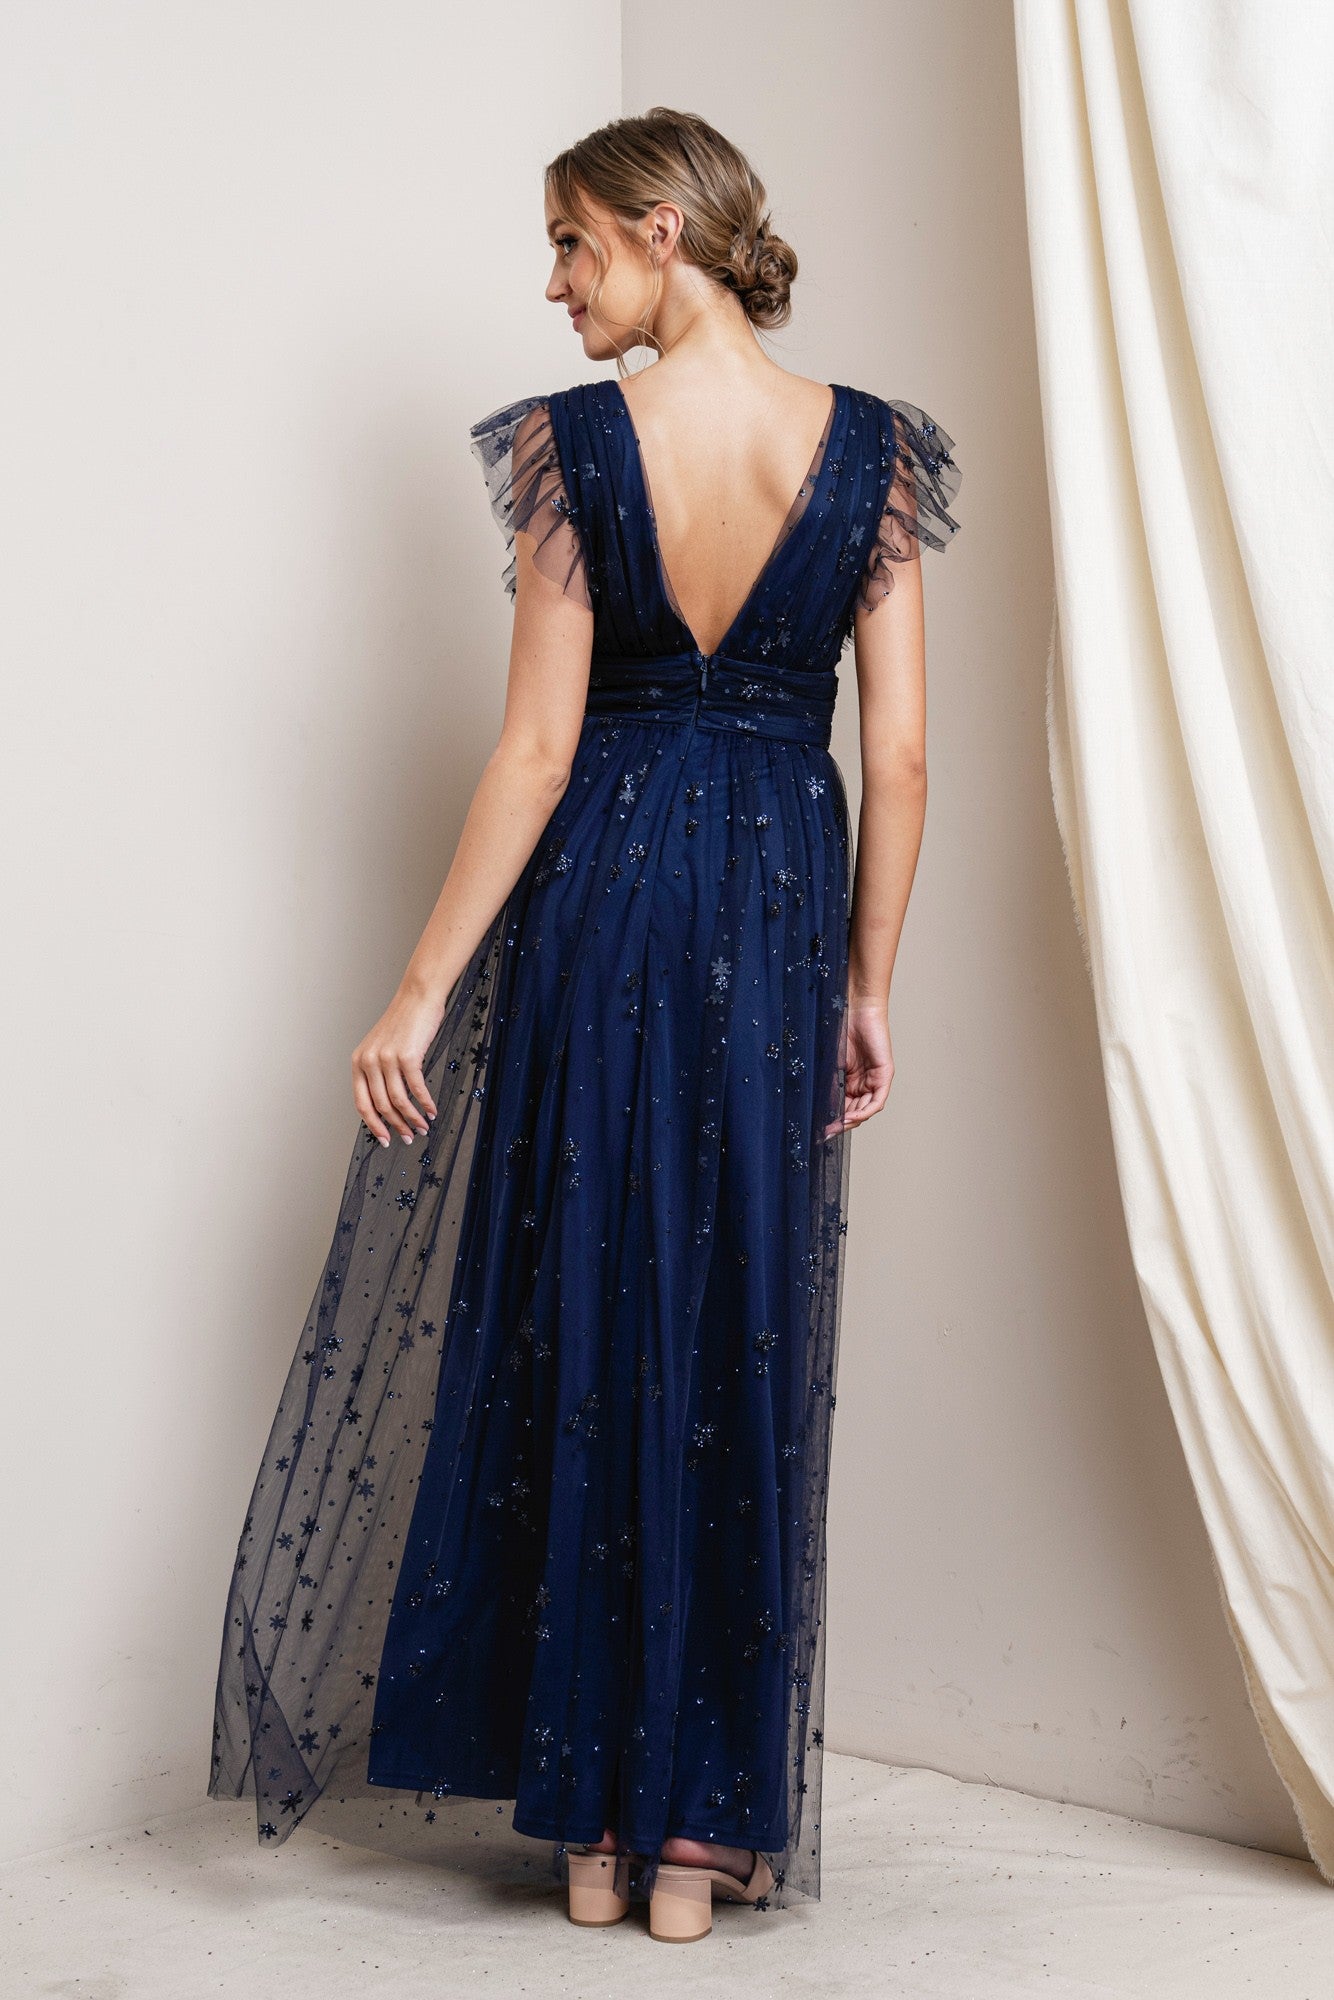 Maxi Star Mesh Dress - Out of the Blue